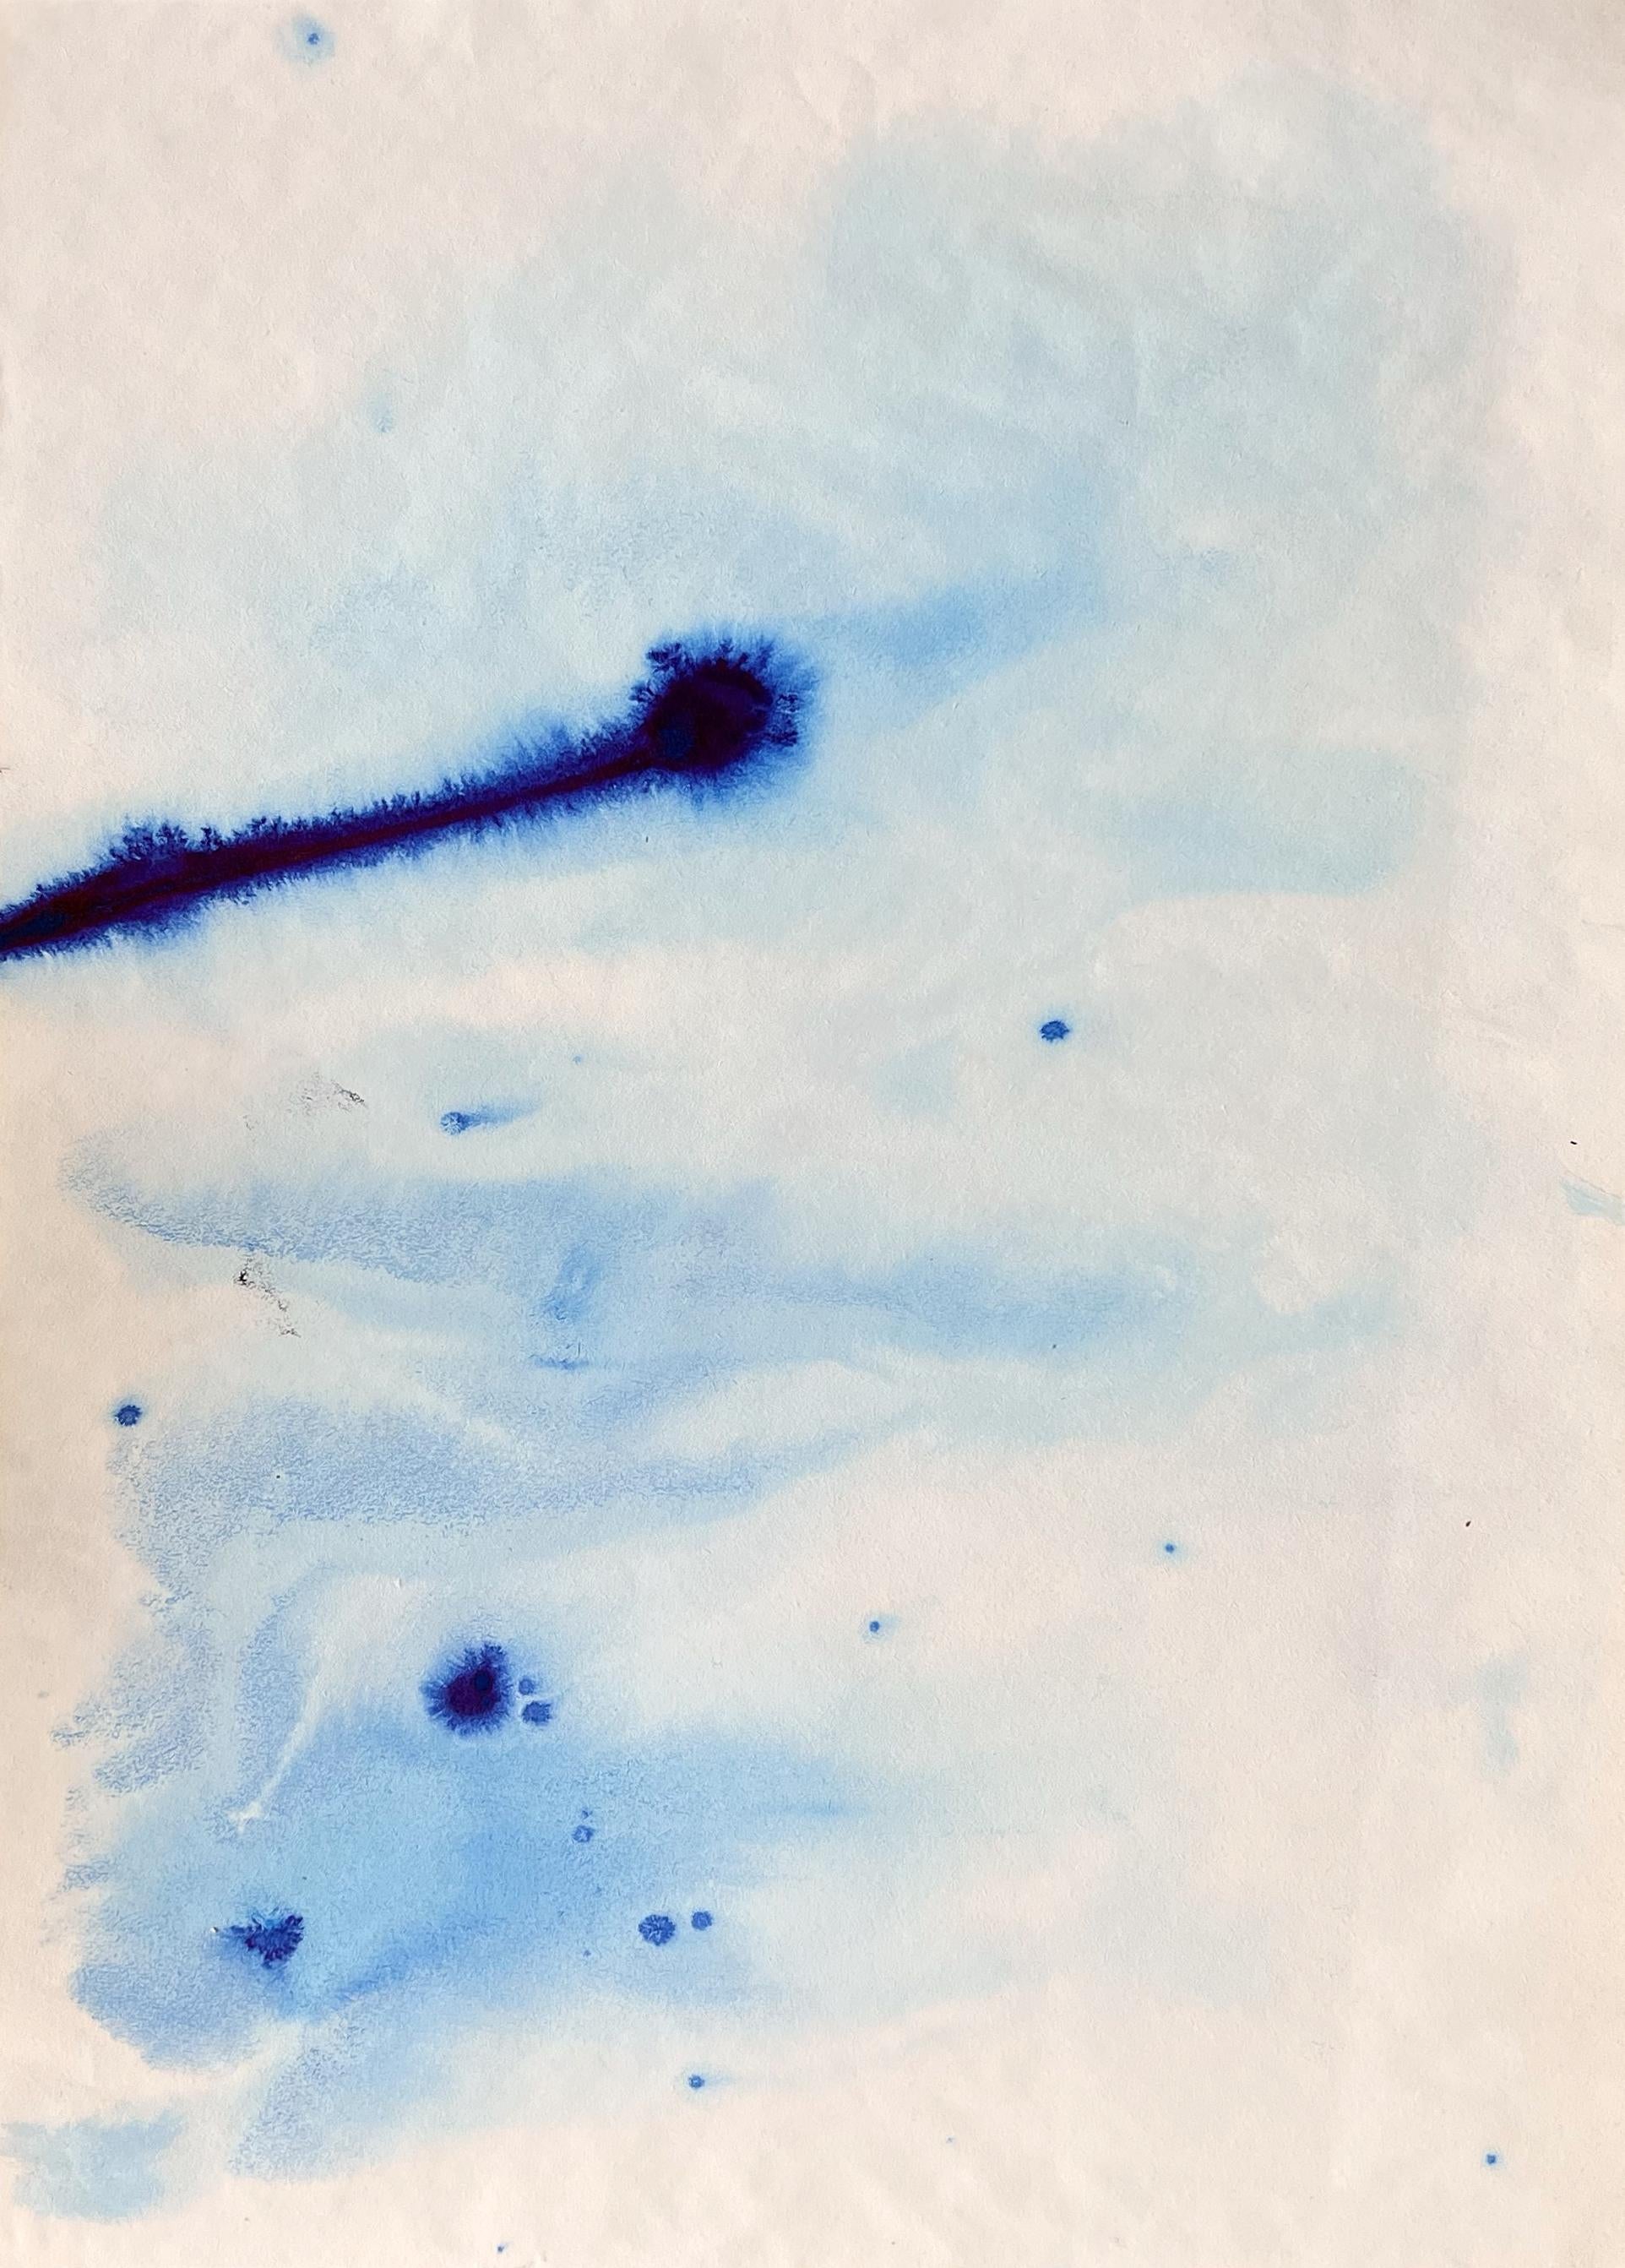 TUSET Abstract Drawing - Original ink on Paper, 30 x 42 cm, Contemporary Painting, Minimalist Blue Sea